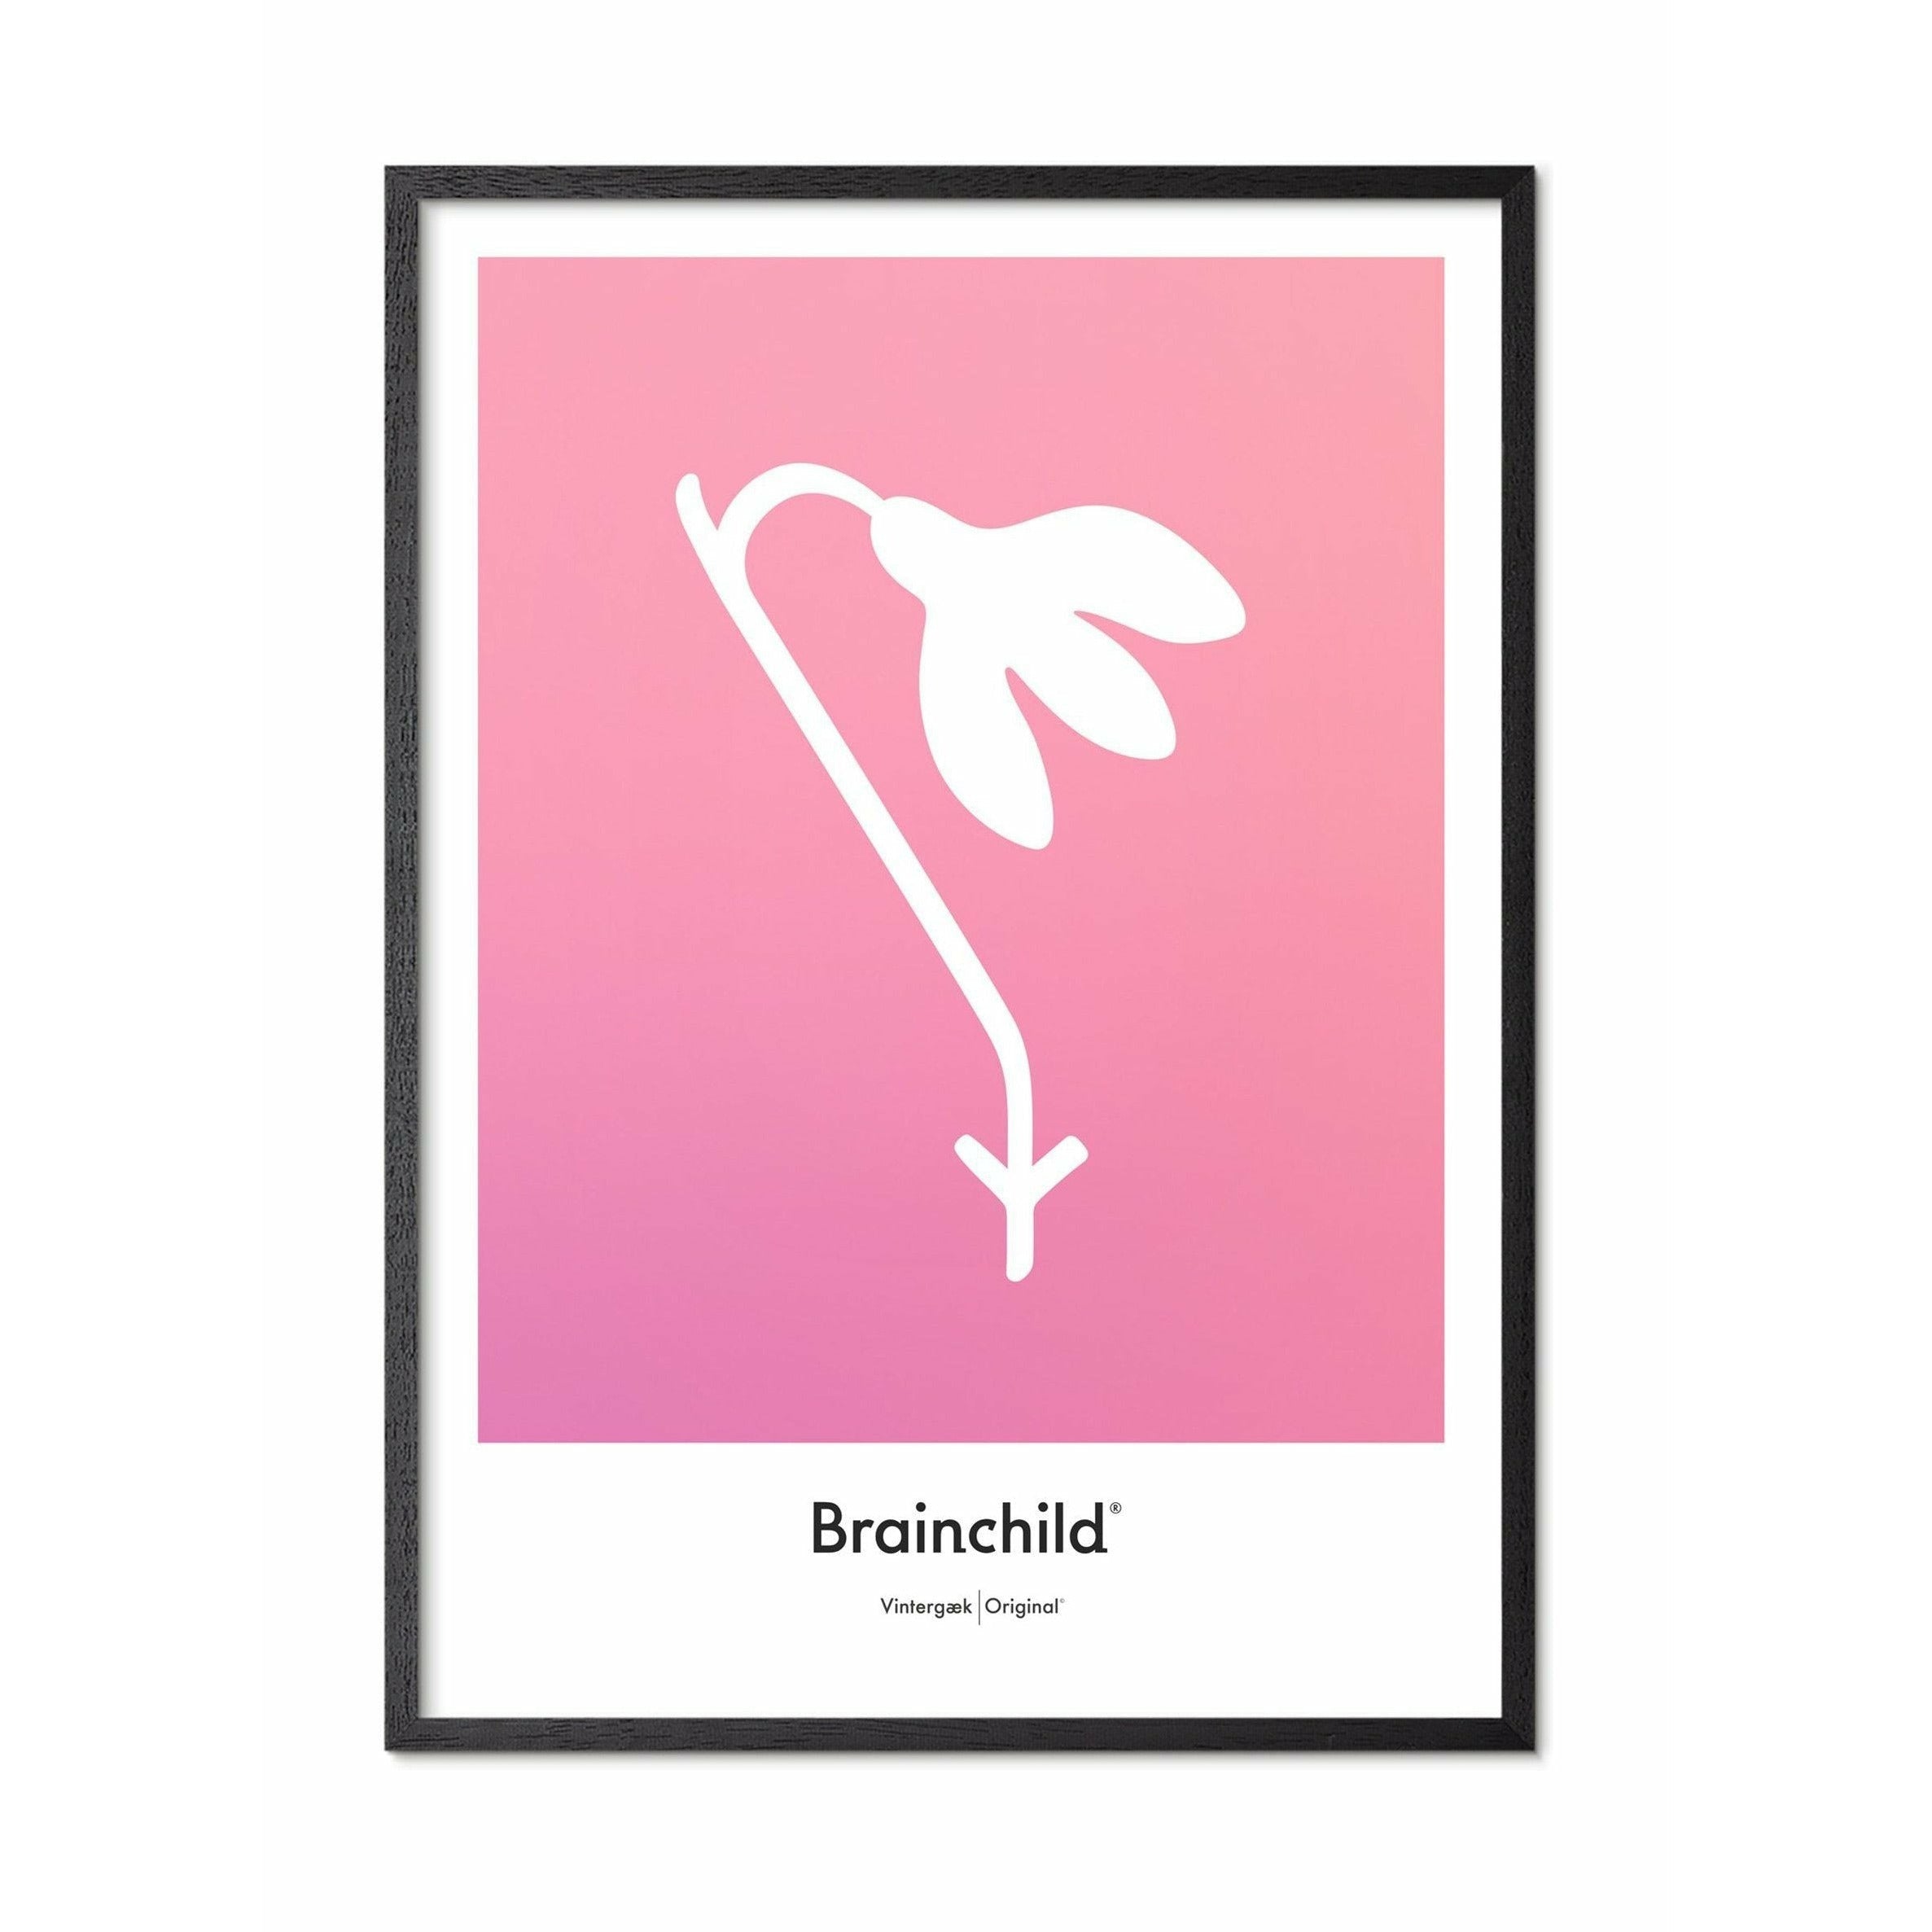 Brainchild Snowdrop Design Icon Poster, Frame In Black Lacquered Wood 30x40 Cm, Pink